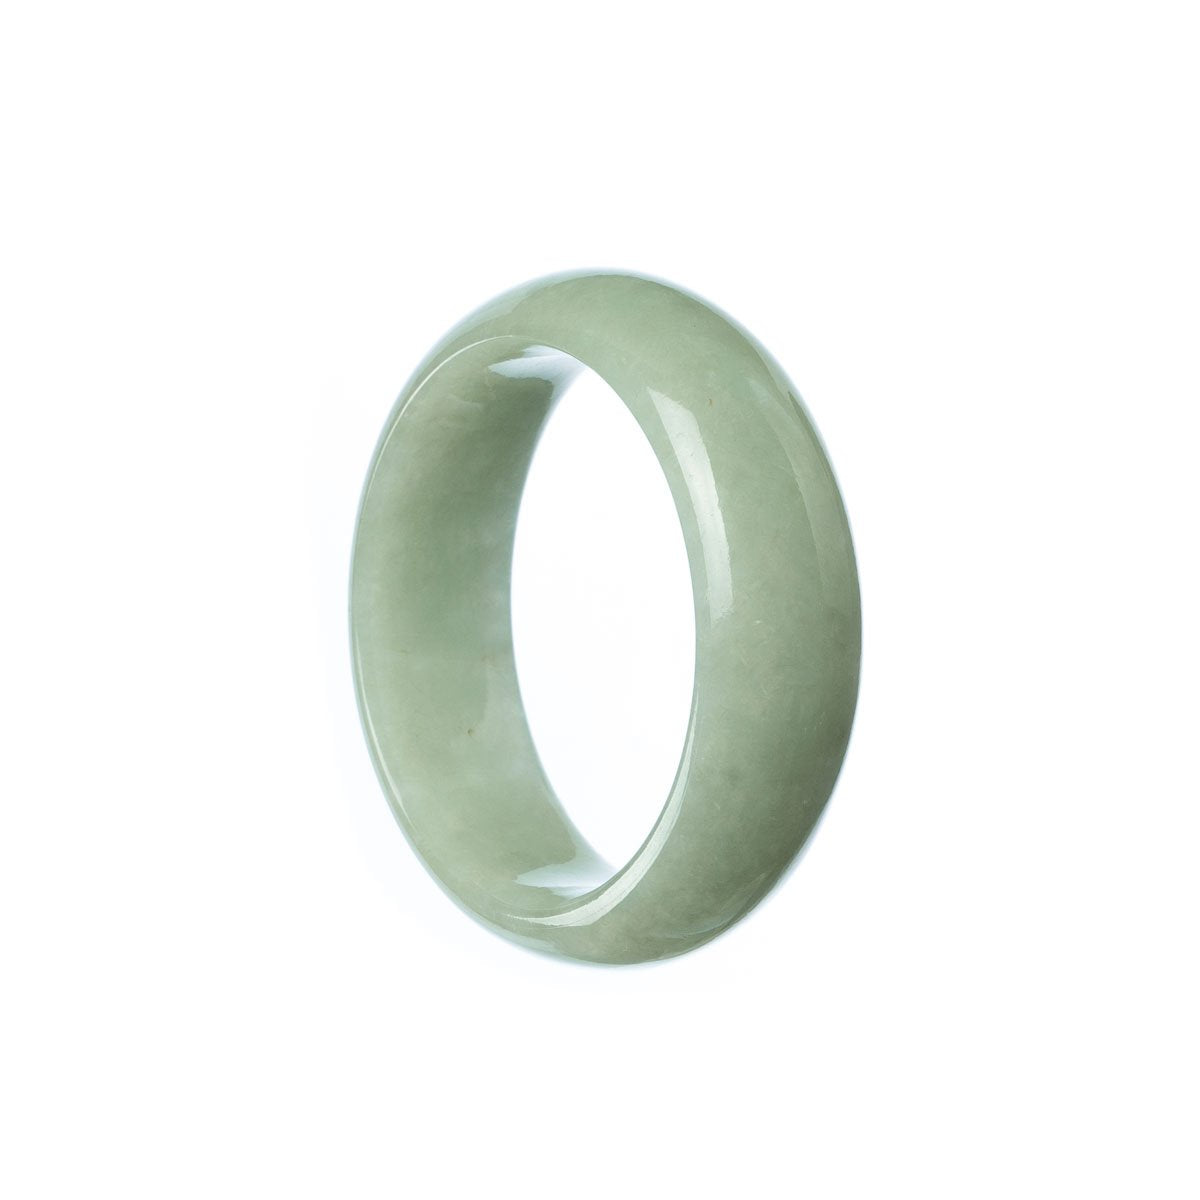 A close-up view of a half moon-shaped green jade bangle bracelet, designed specifically for children. The jade is genuine and natural, displaying a beautiful green color. This bangle is part of the MAYS™ collection.